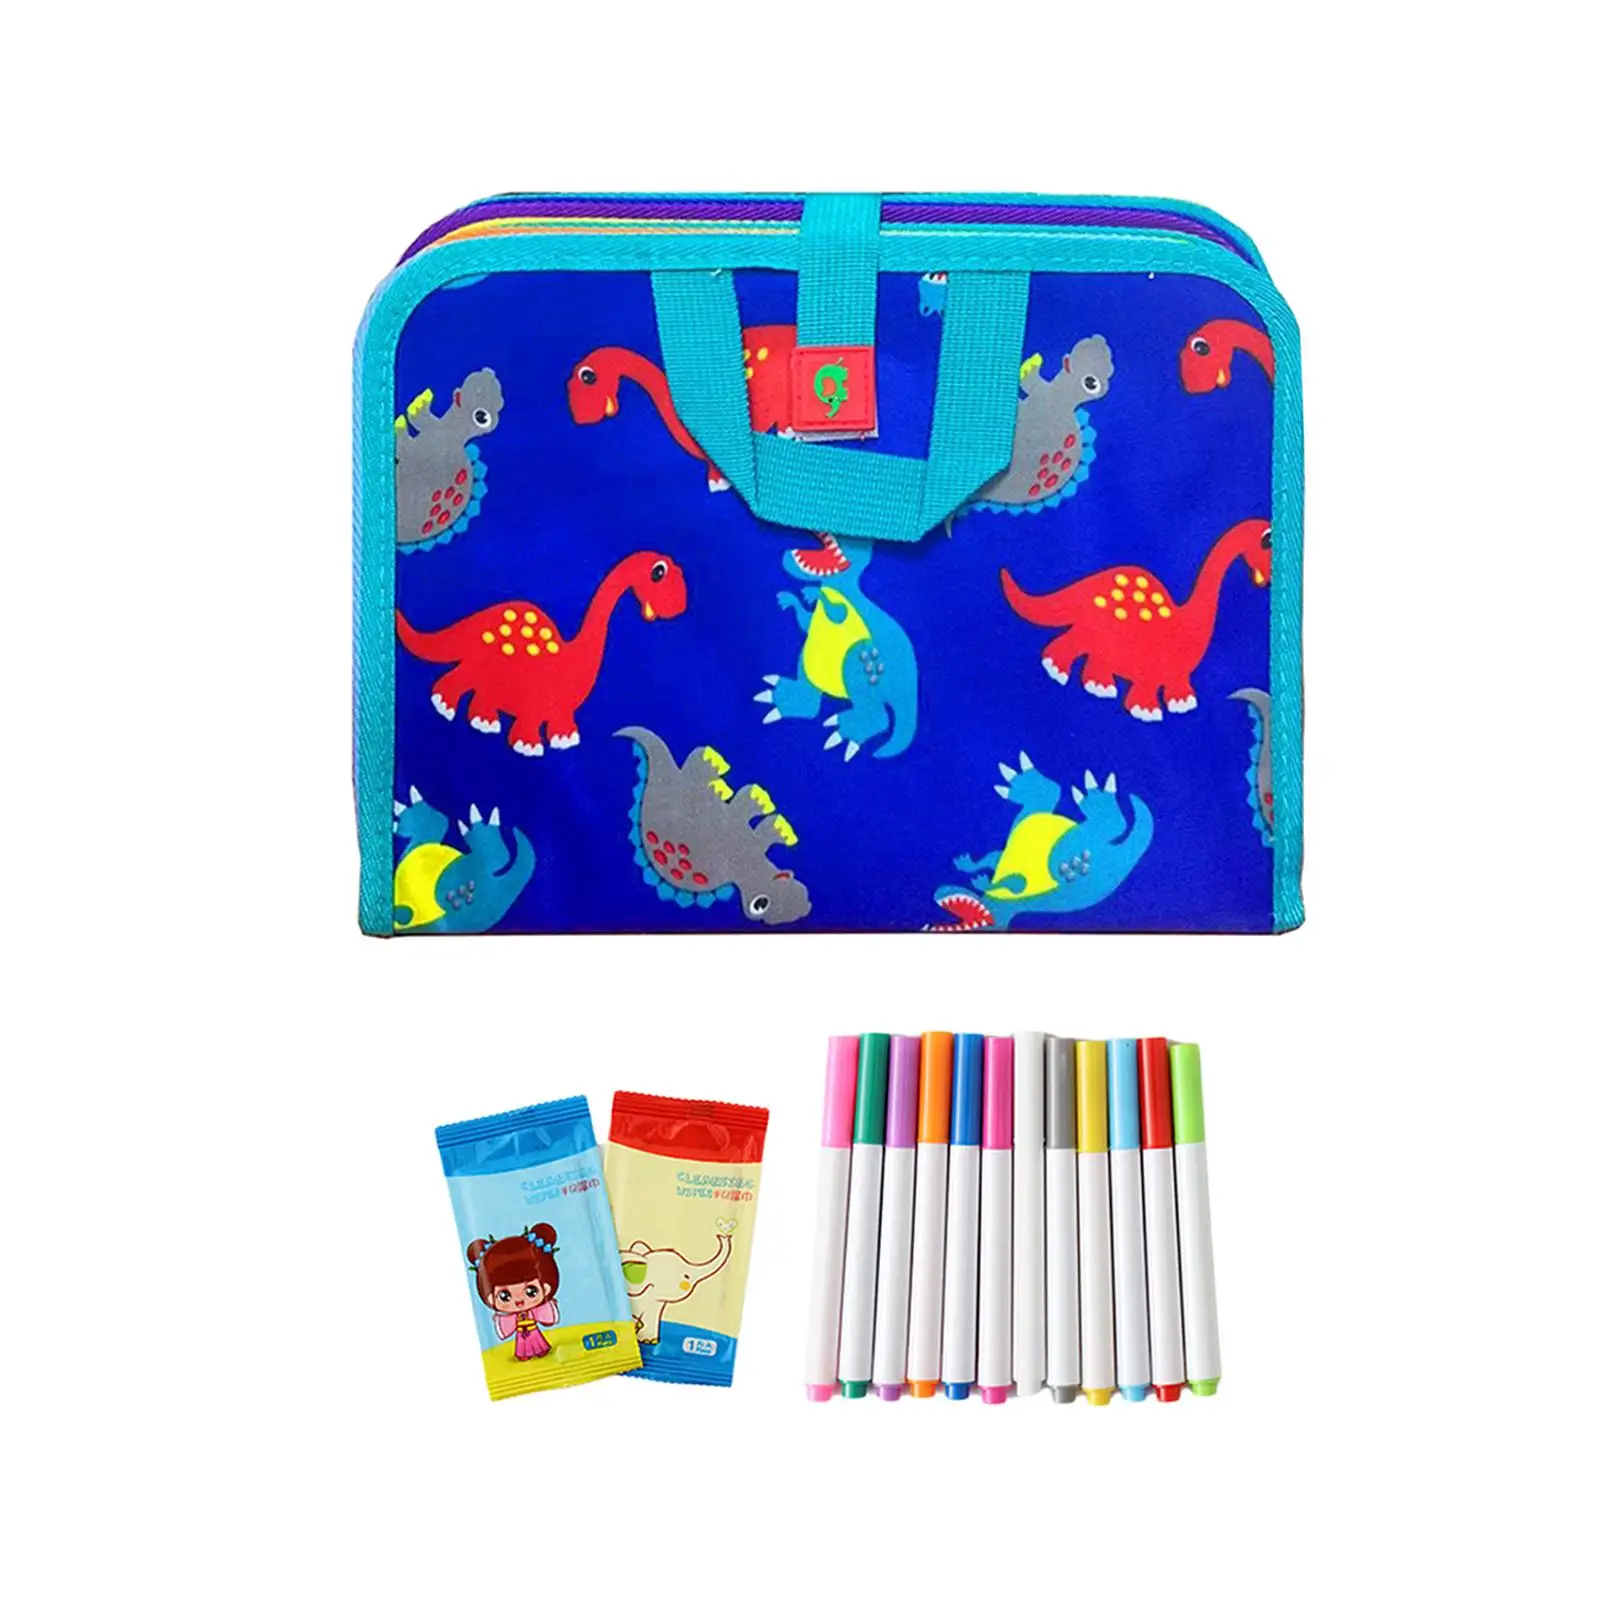 Kids Erasable Book Doodle Set Writing Painting Set Boys Girls Xmas Gift Portable Painting Toys Reusable with 12 Watercolor Pens